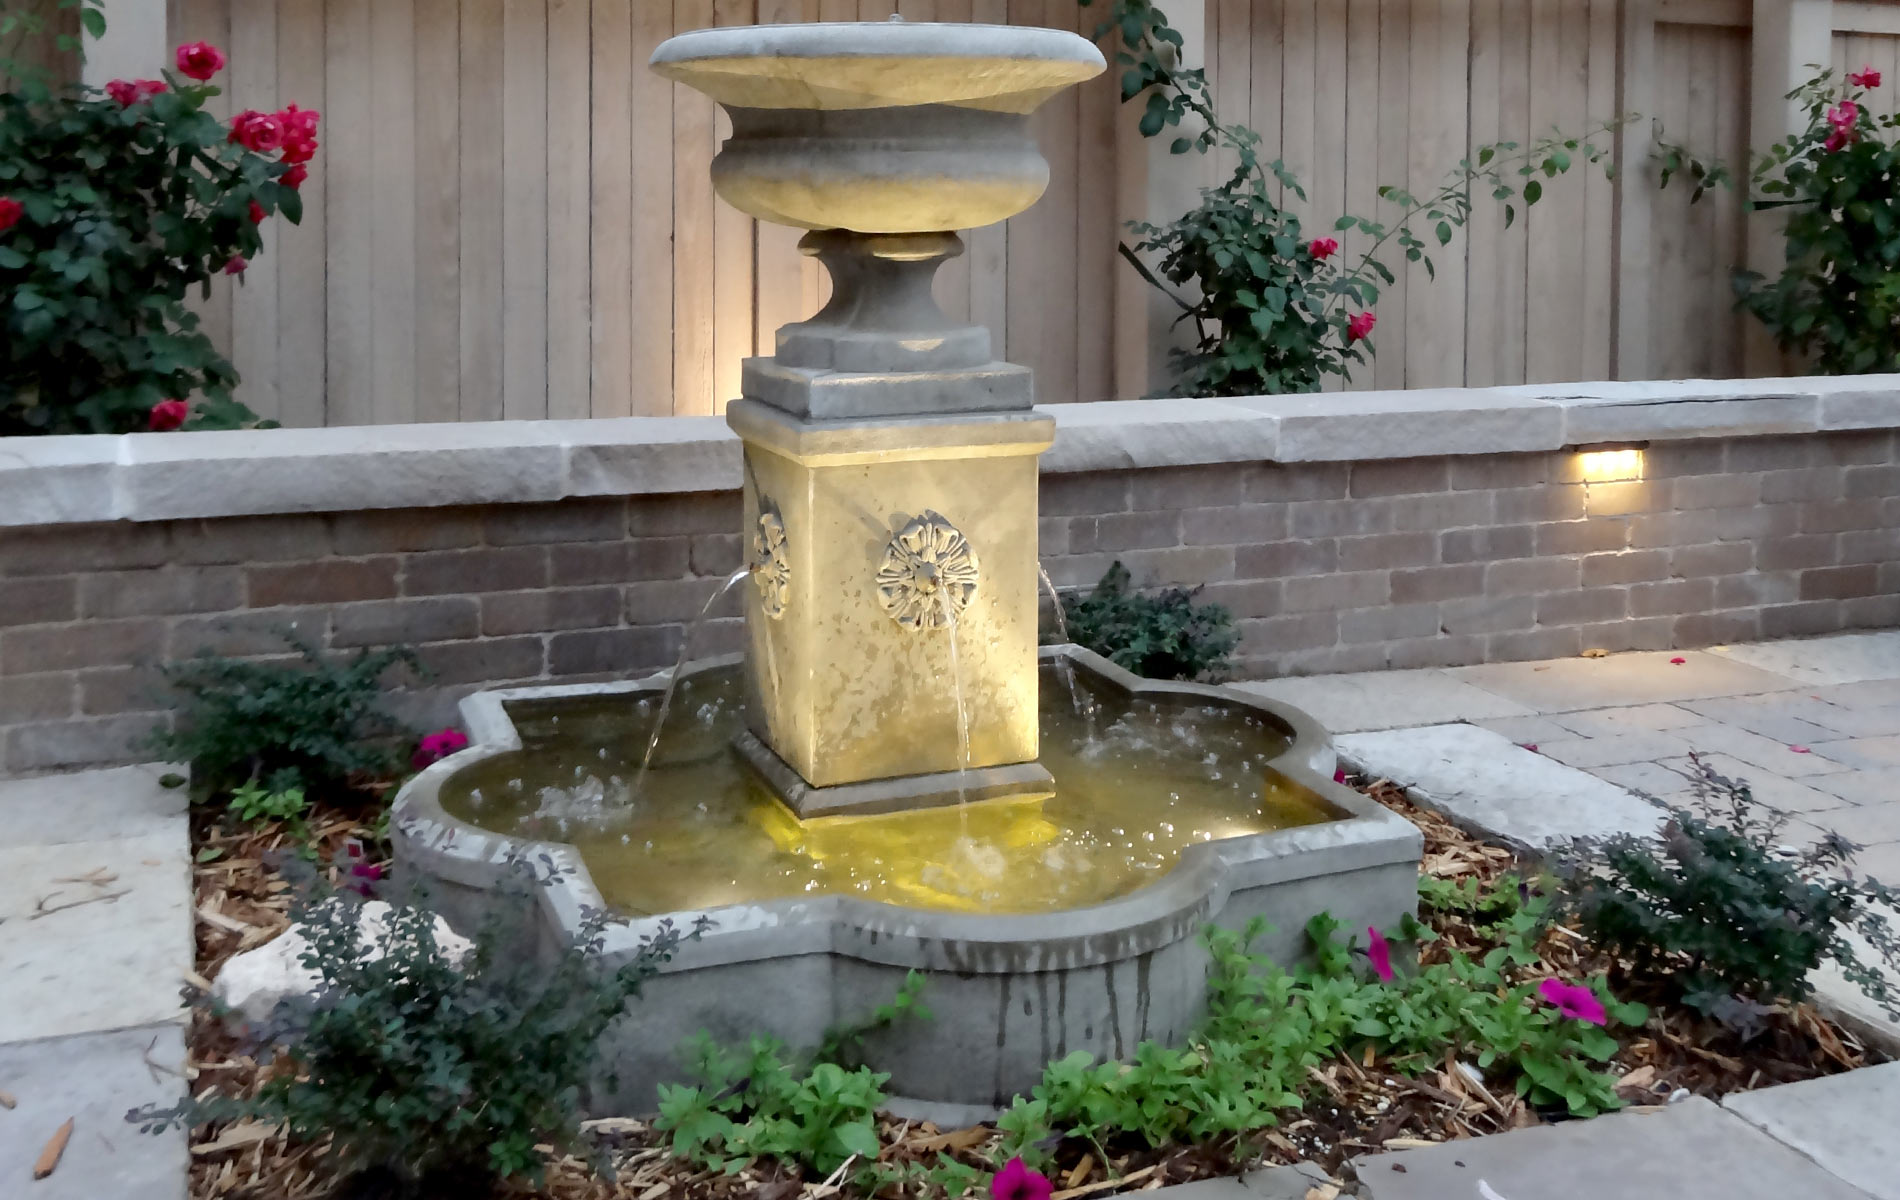 Cast stone water feature creates a soothing sound for formal outdoor living space